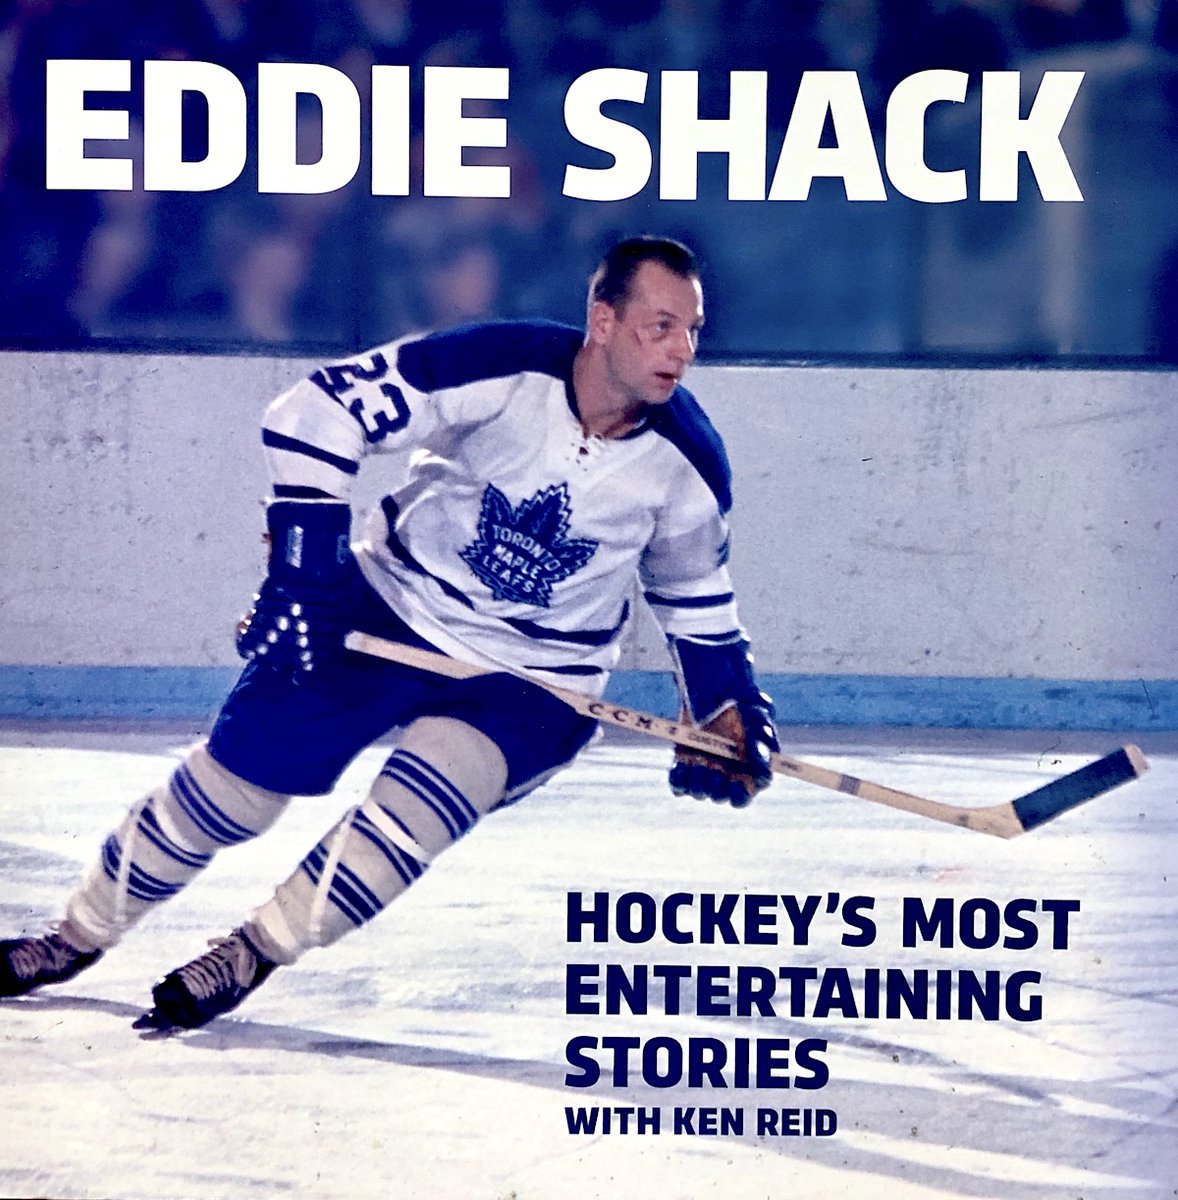 3/3 Gretzky: “People loved (Shack) because they could tell he just played from his heart and I think that’s why fans and grandmothers and mothers loved him to death. They adored him because they enjoyed watching him play. … He’s a character and what you see is what you get.”